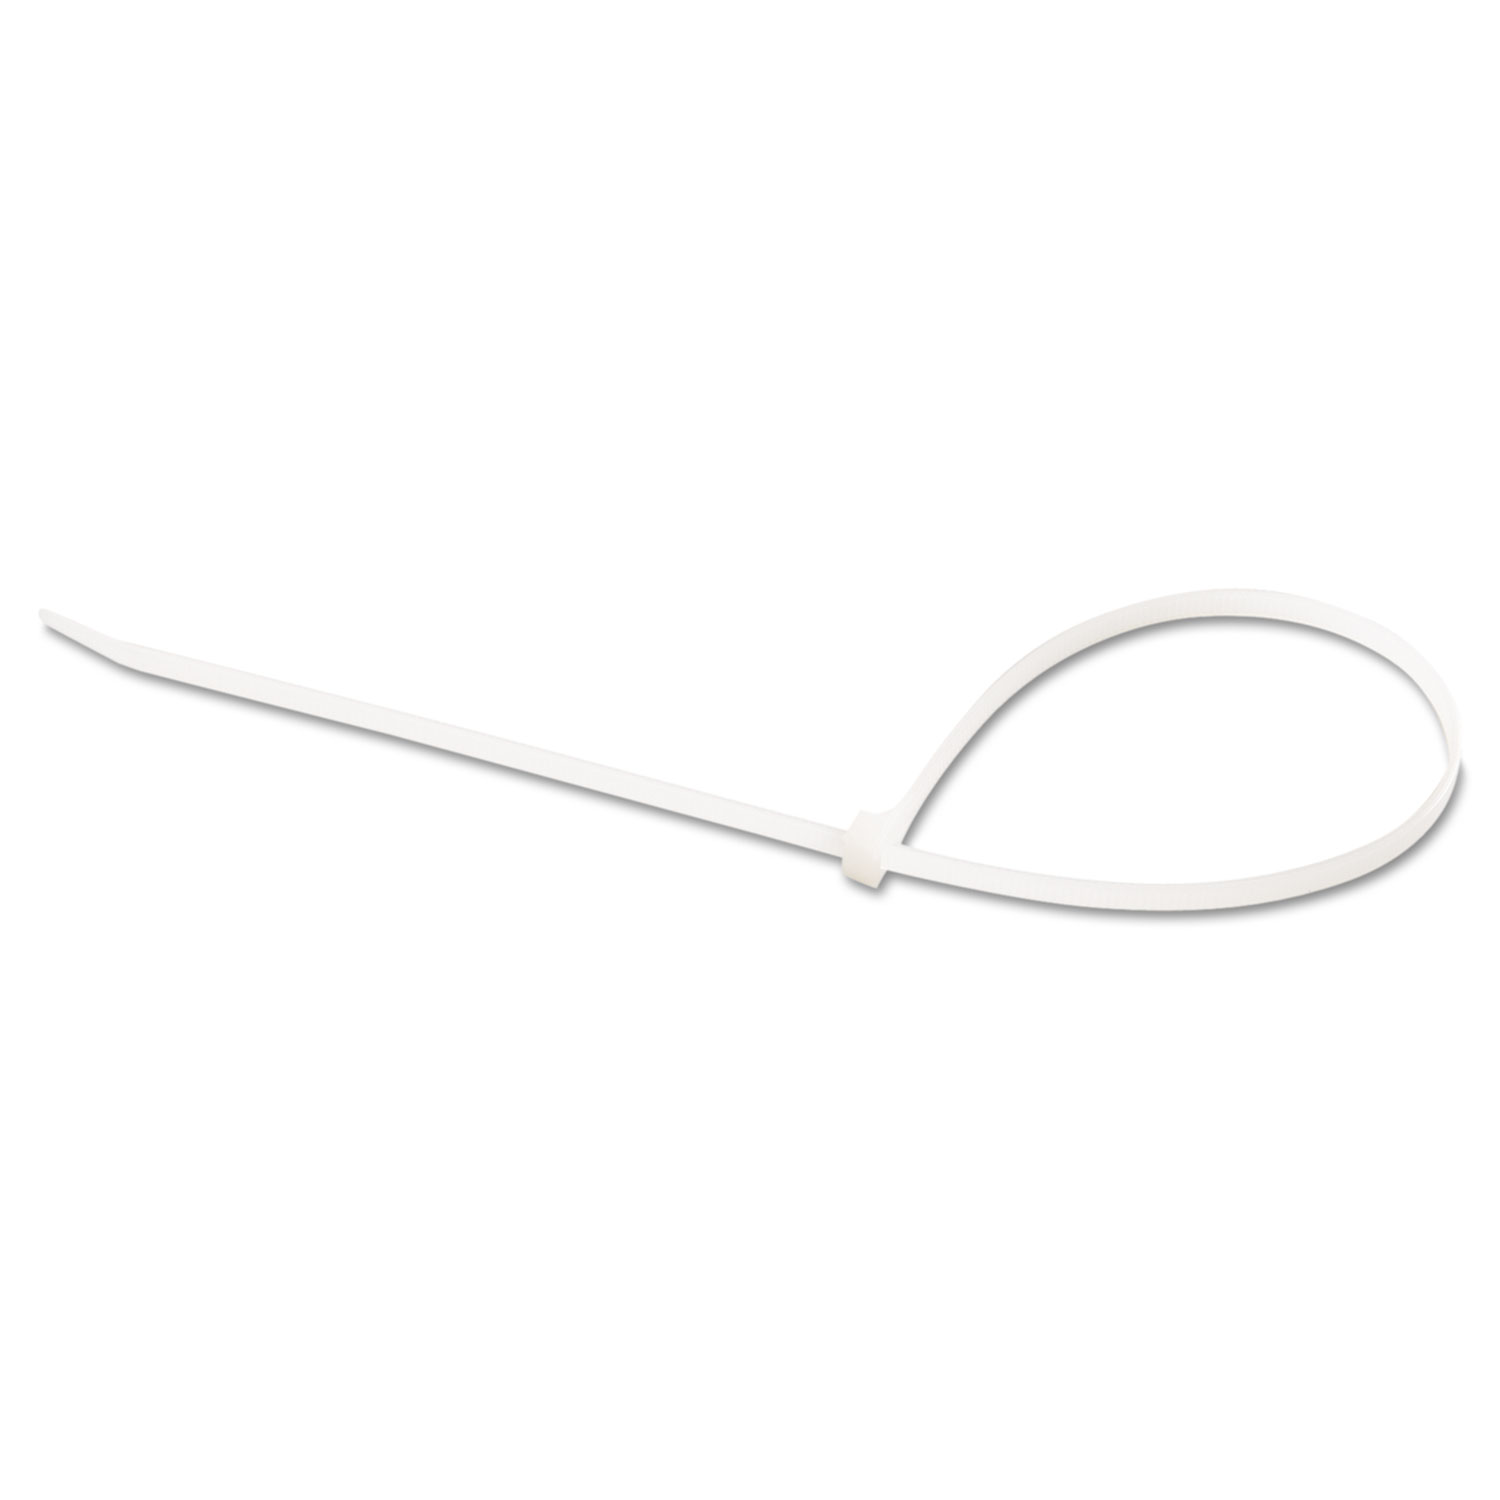 Cable Ties, 14, 75 lb, White, 100/Pack